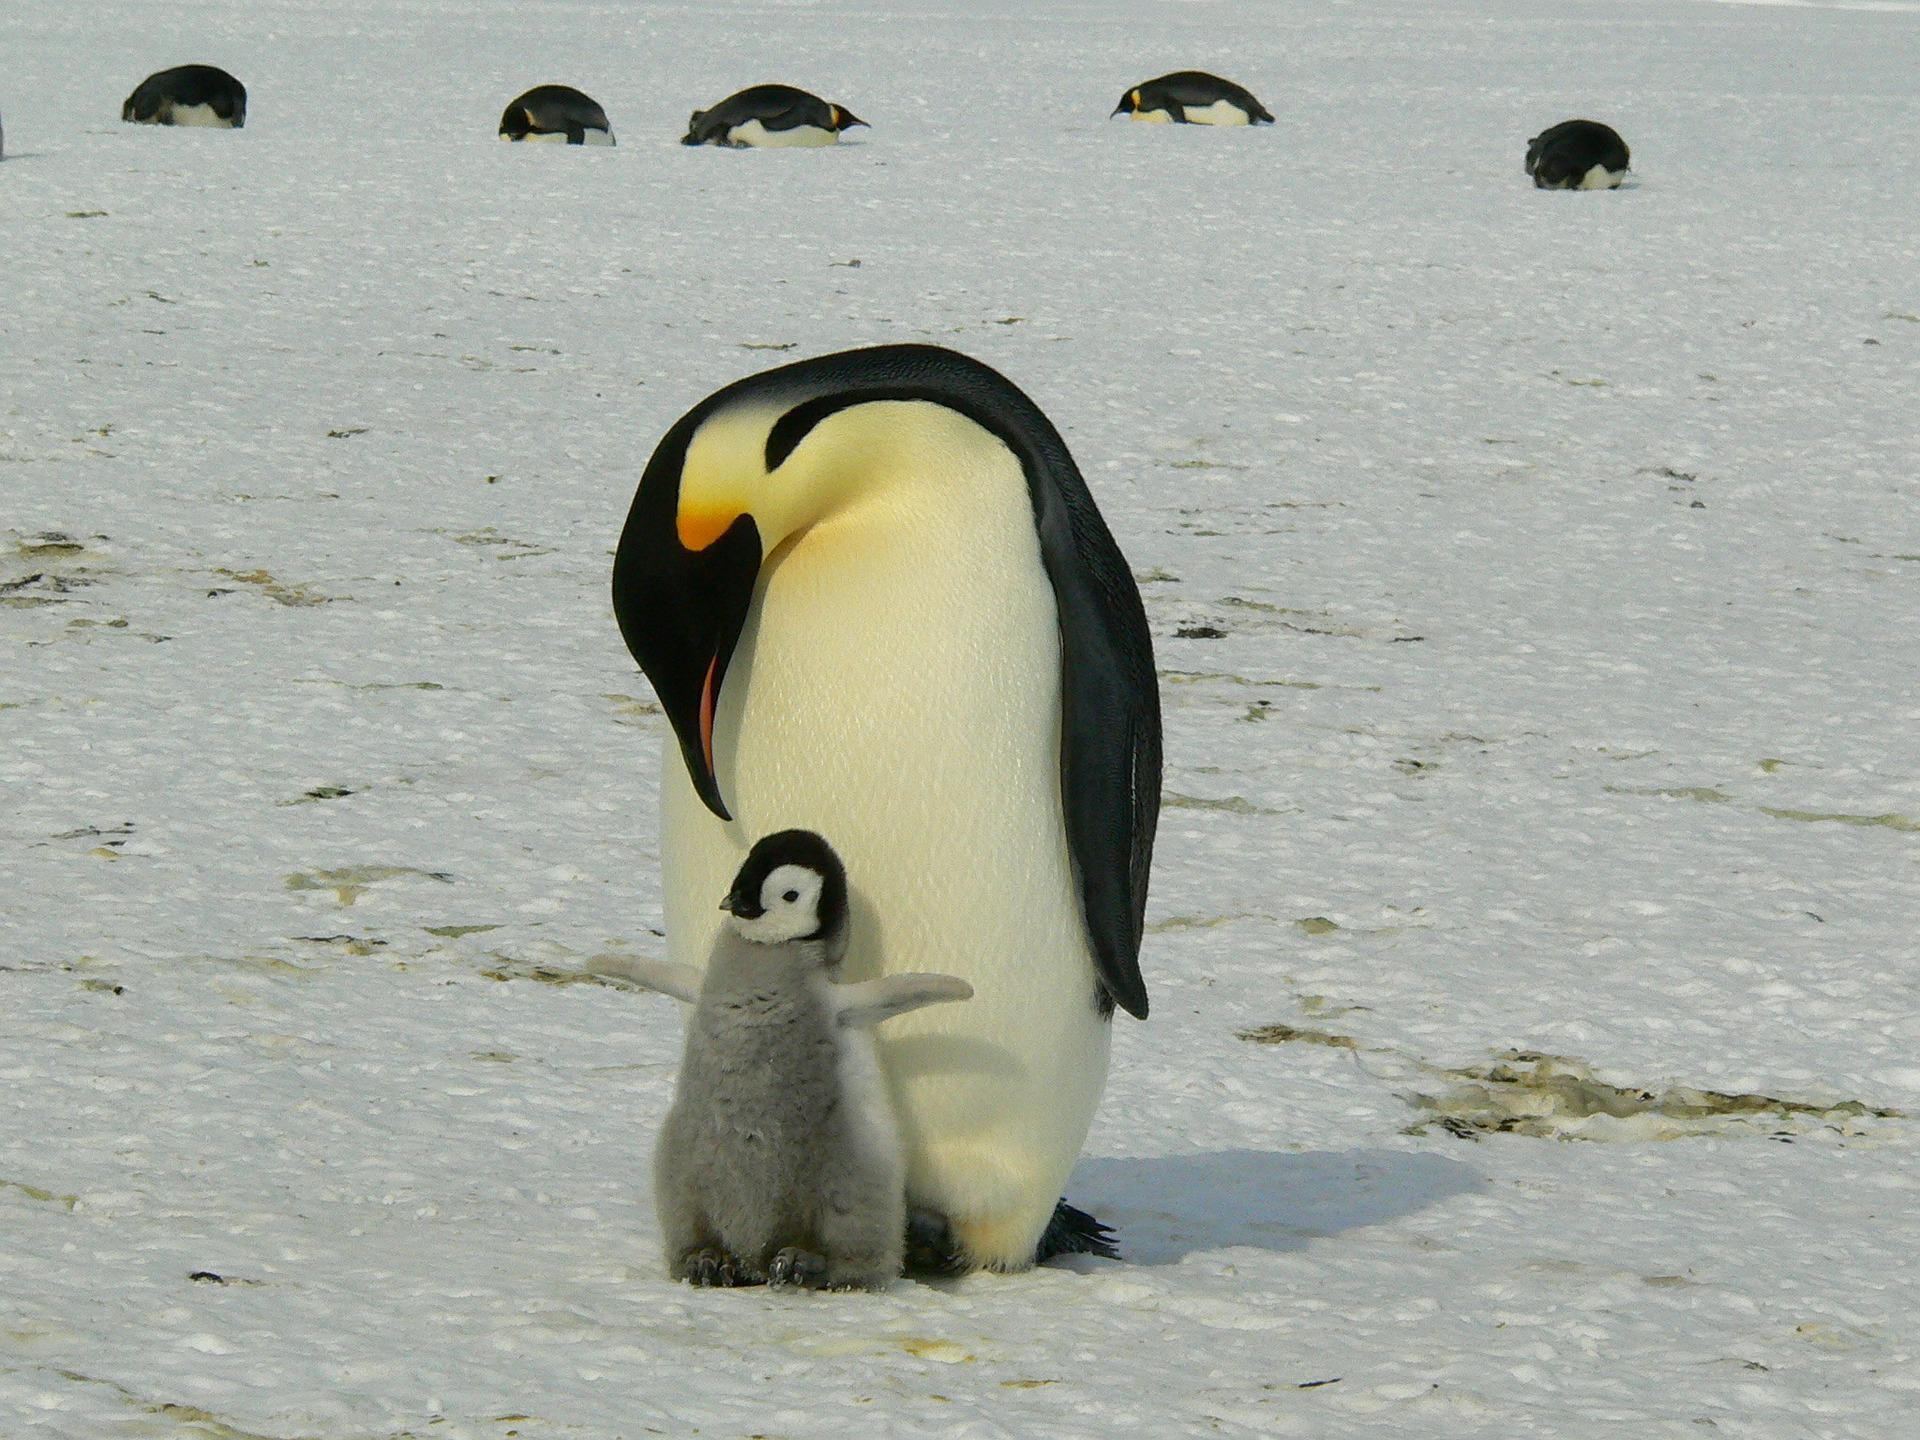 A large penguin standing in the ice, a smaller penguin huddled close by its side.